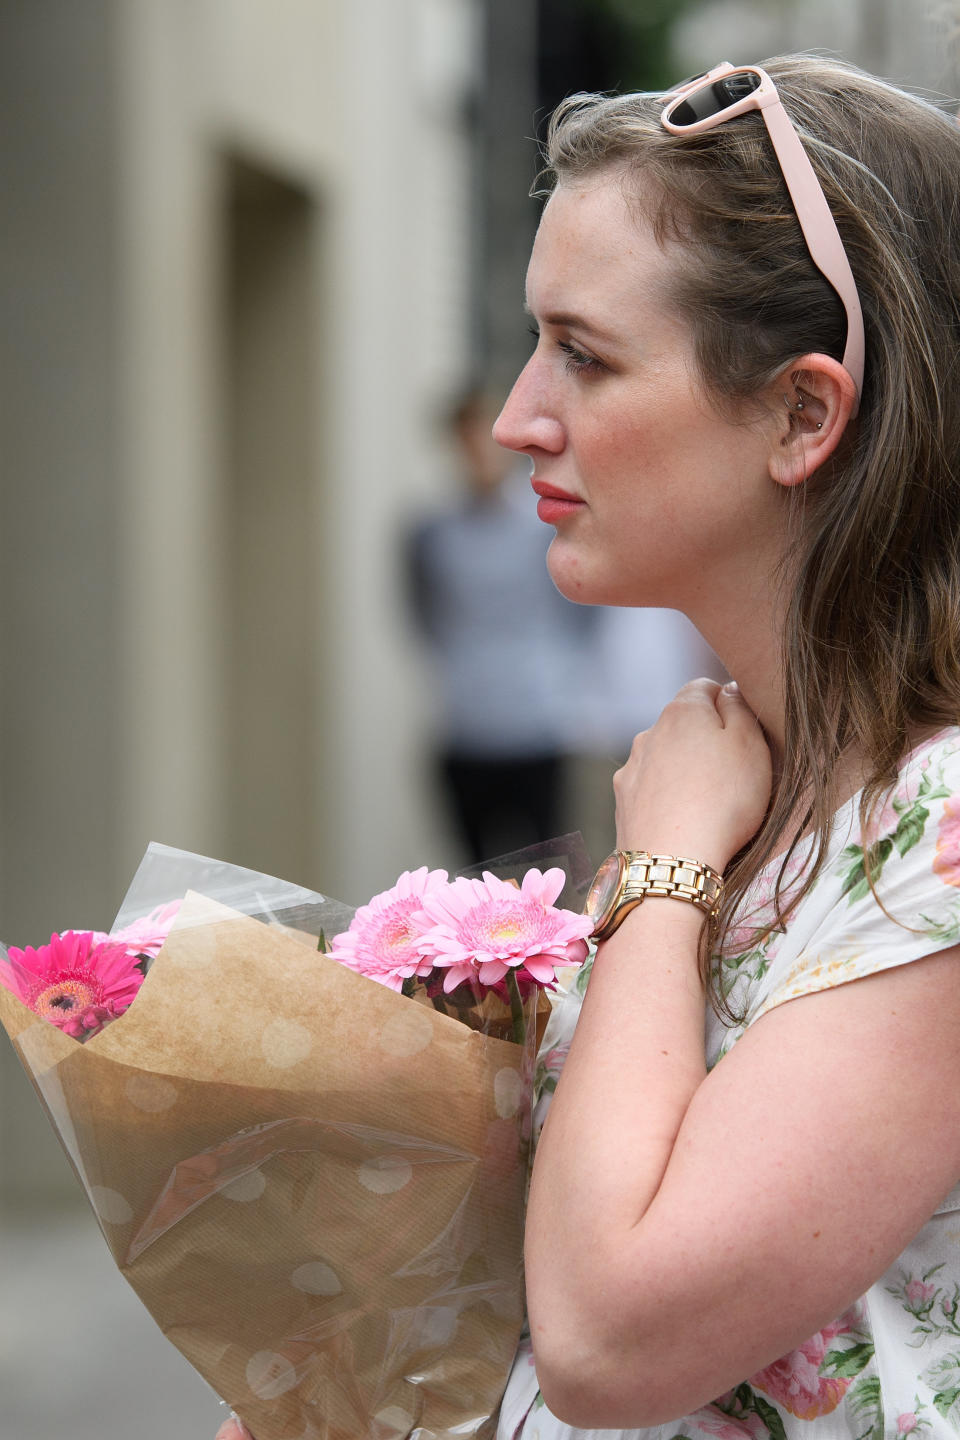 A woman prepares to lay some flowers for those killed, at the perimeter cordon, following last night's London terror attack, on June 4, 2017 in London, England.